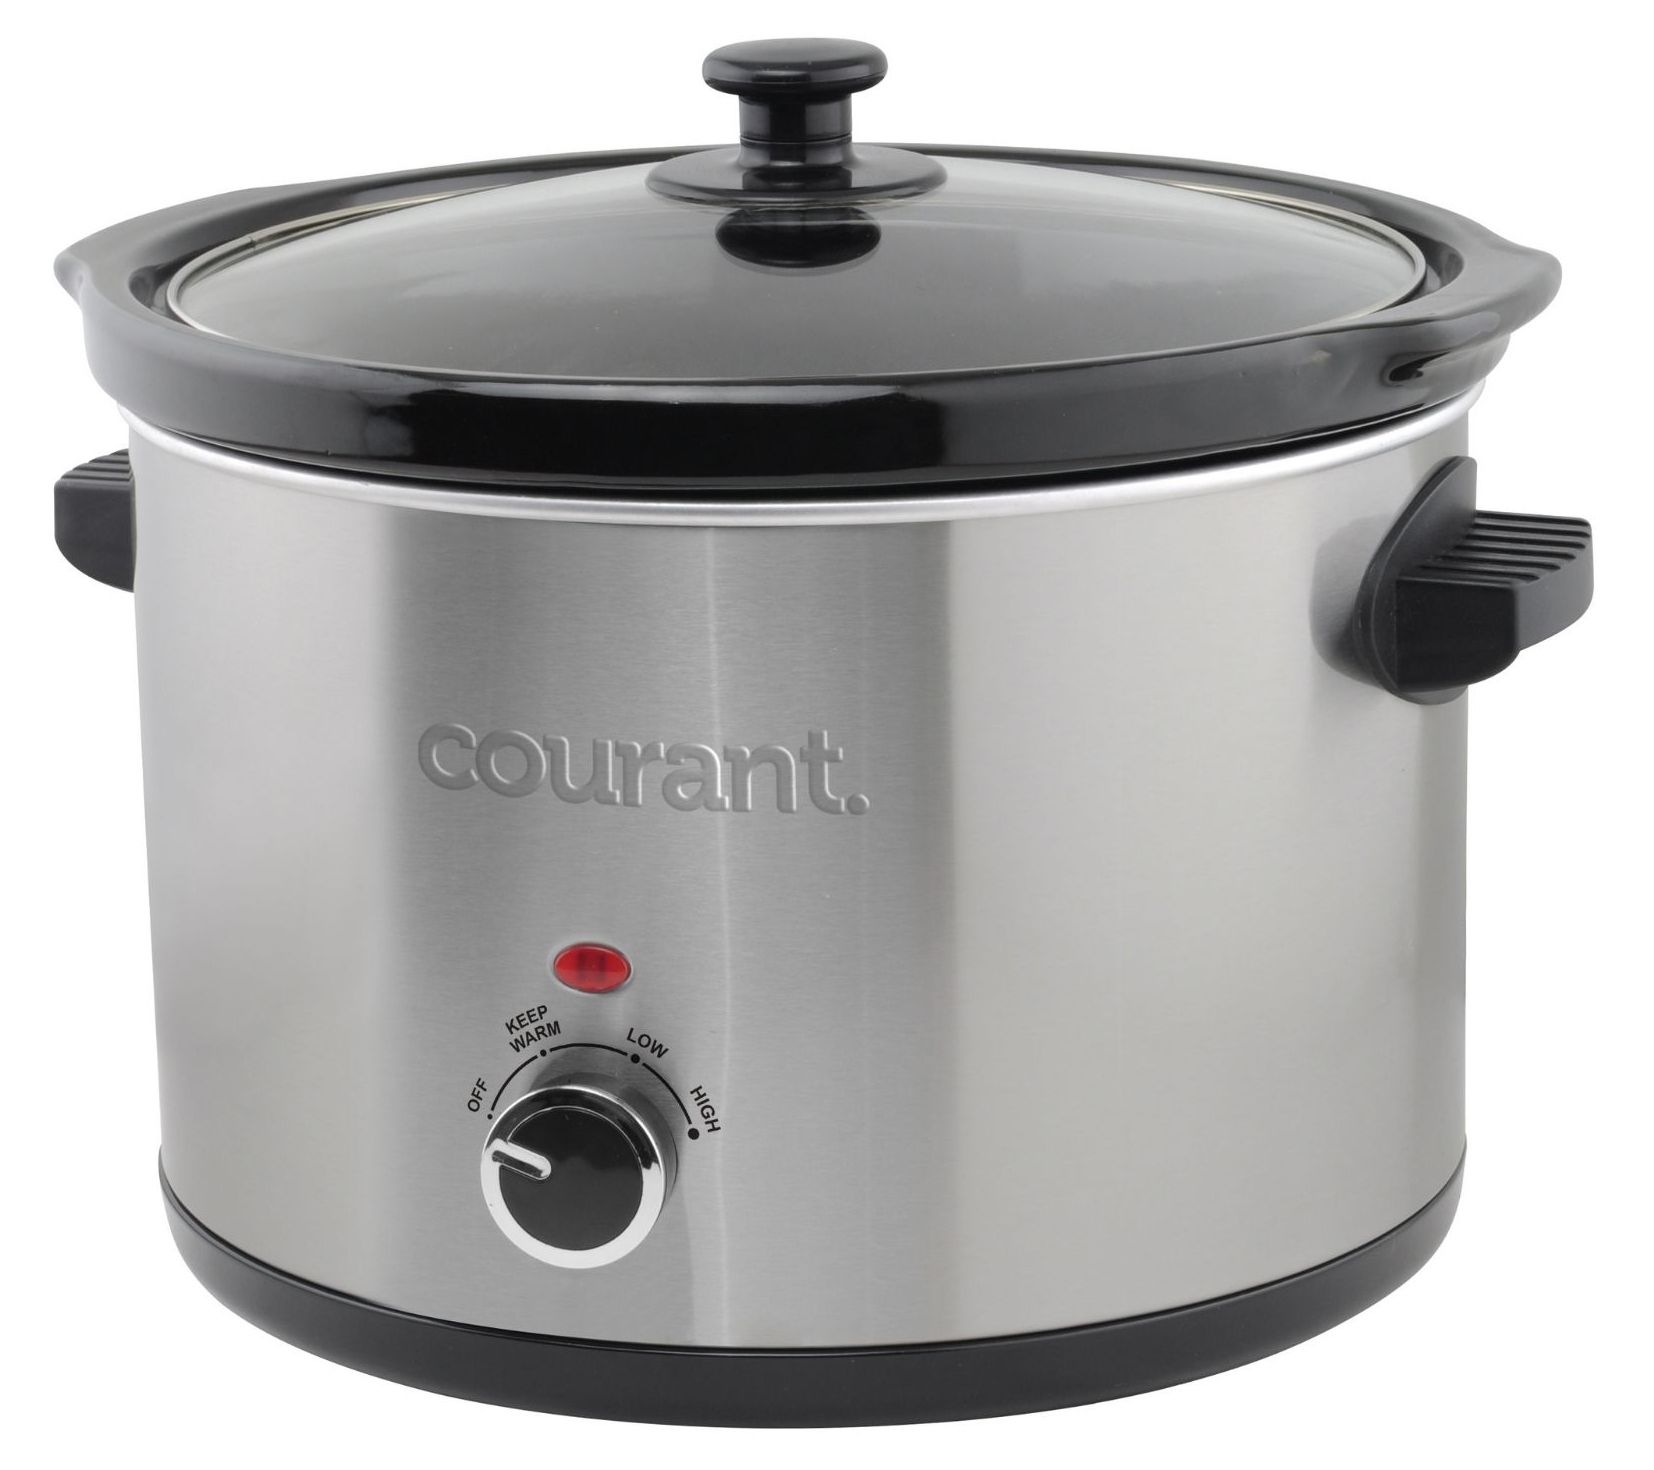 Courant 5-qt Slow Cooker - Stainless Steel 